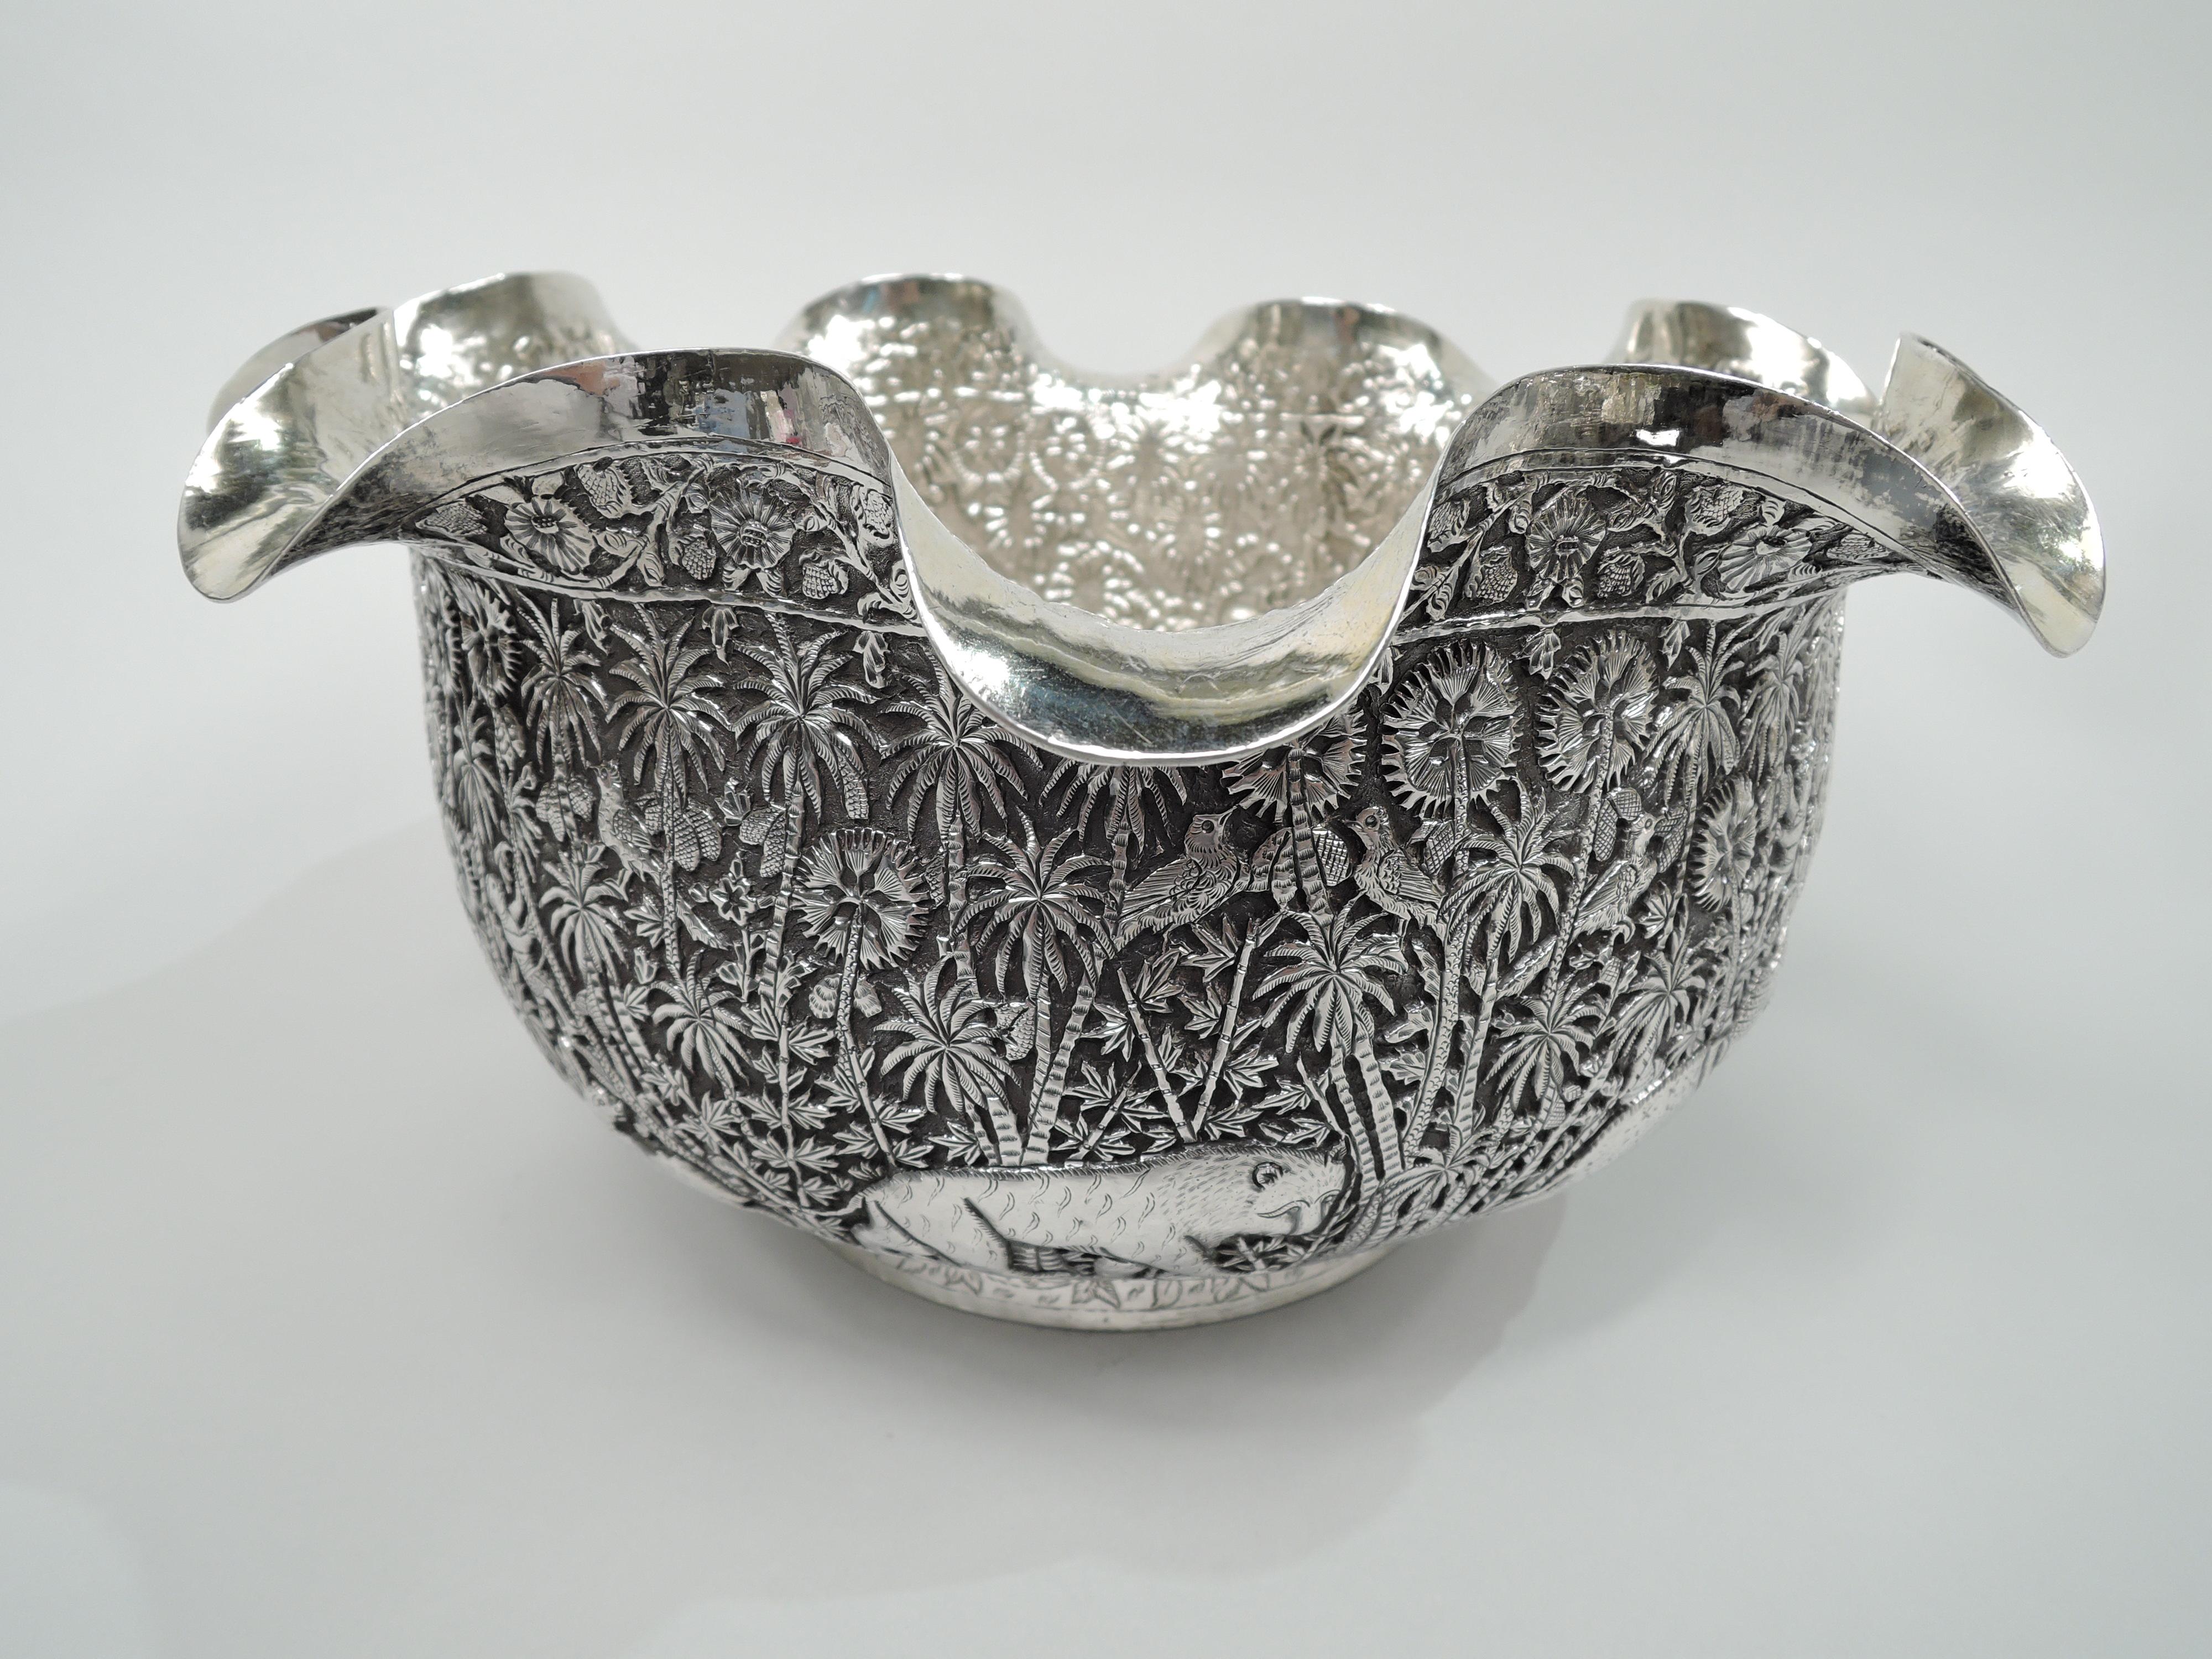 Indian Colonial silver bowl, circa 1890. Round with curved sides and wavy turned-down rim; short and canted foot. Dense repousse frieze depicting wild beasts loping through the jungle including a bear, antelope, jittery bunny, and caparisoned